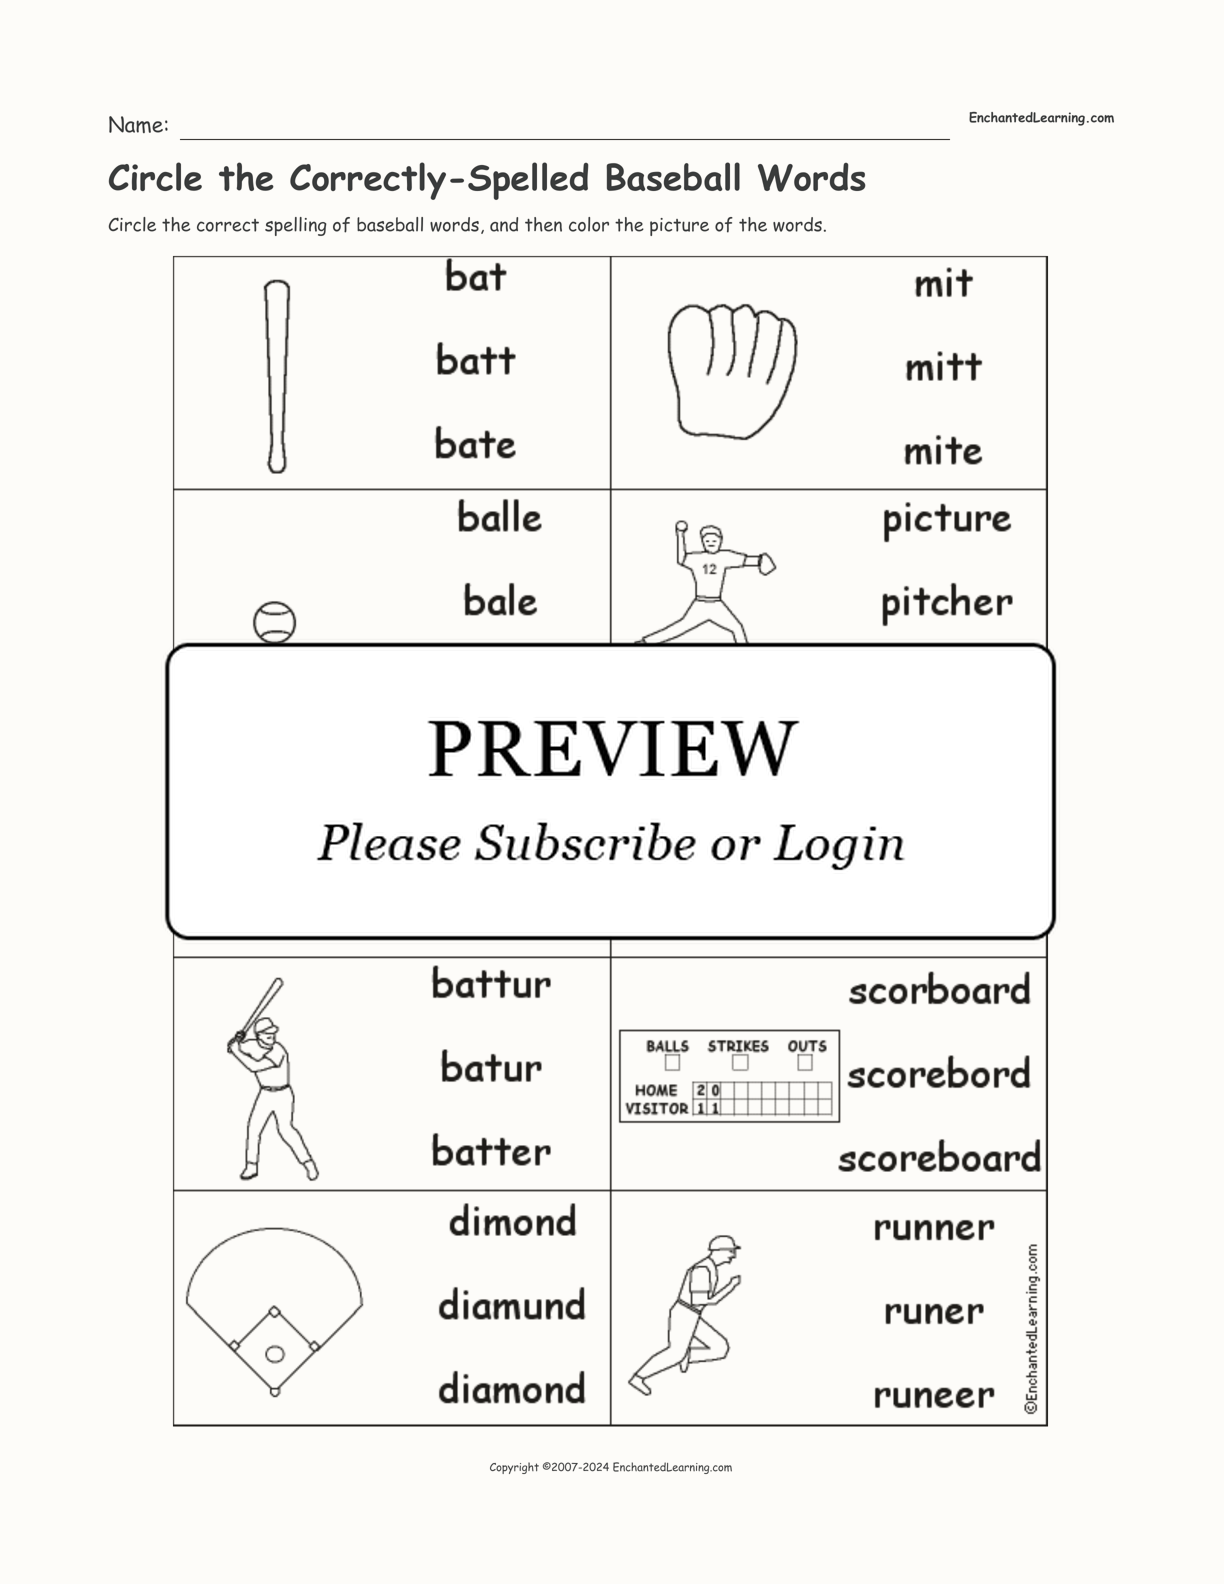 Circle the Correctly-Spelled Baseball Words interactive worksheet page 1